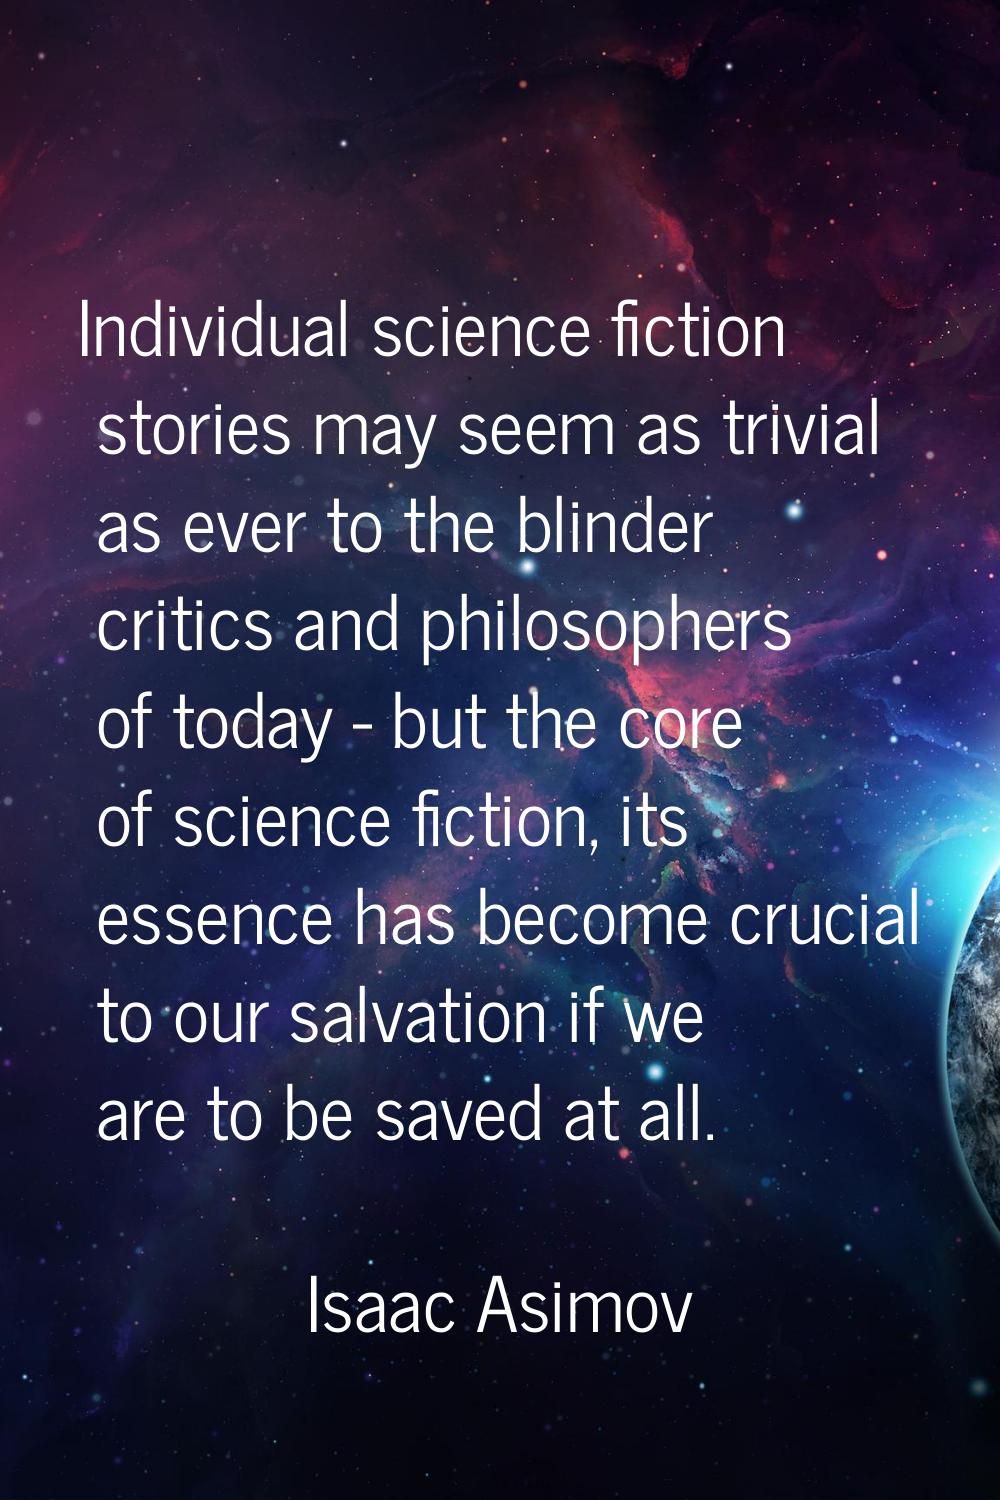 Individual science fiction stories may seem as trivial as ever to the blinder critics and philosoph